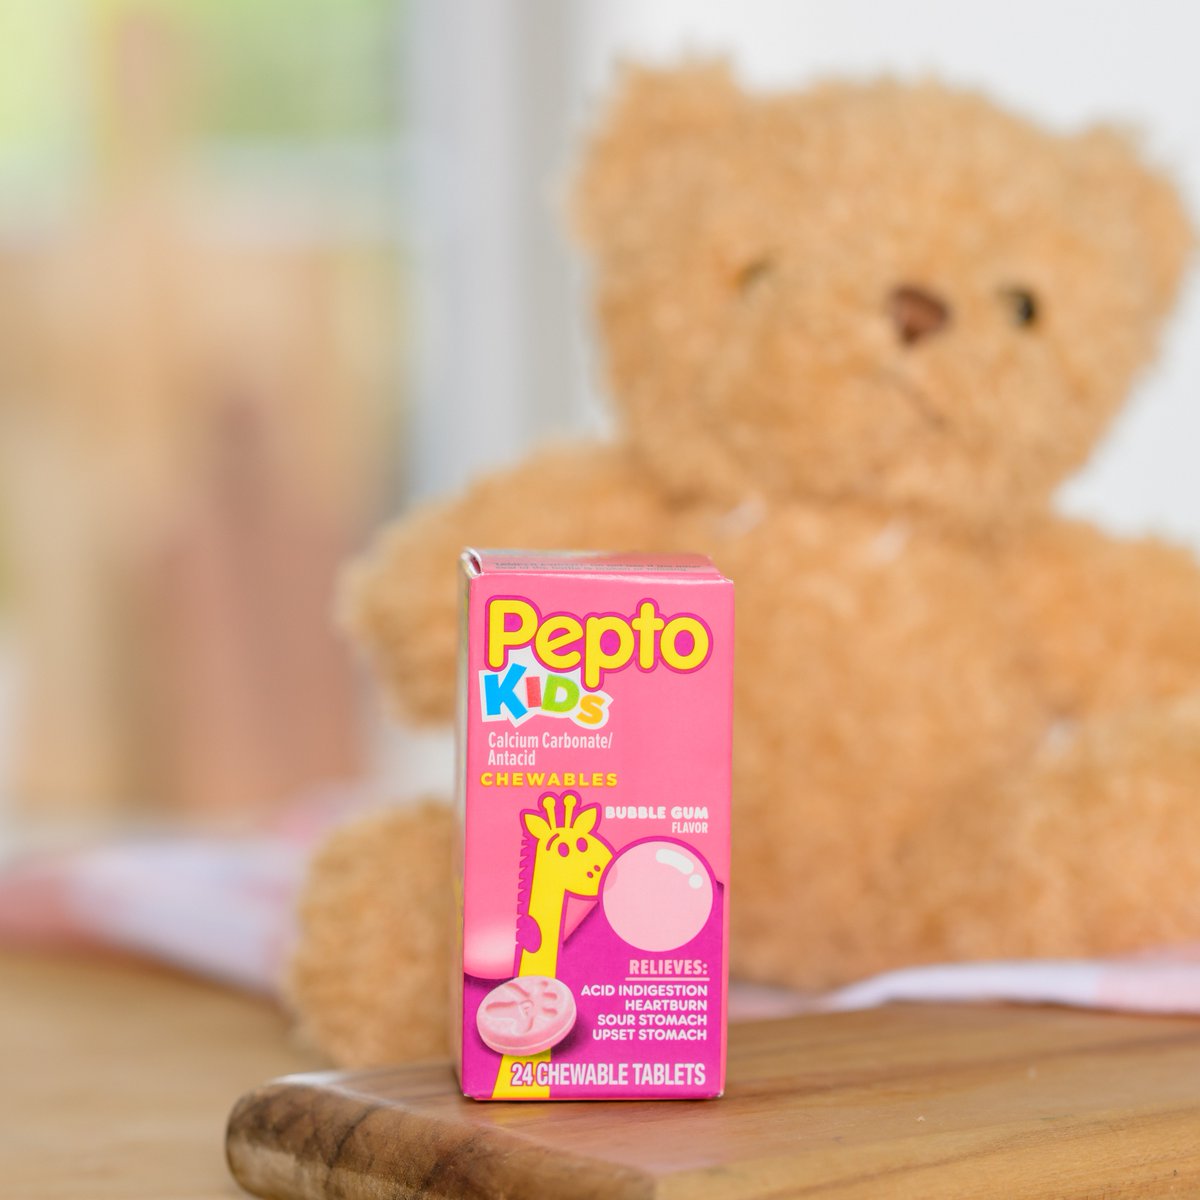 Pepto Kids is here to relieve your little one’s heartburn, acid indigestion, sour stomach and upset stomach with a great-tasting bubblegum chewable tablet. Get yours before the tummy troubles hit: spr.ly/6013MtsWH . . . Use as directed. Keep out of reach of children.